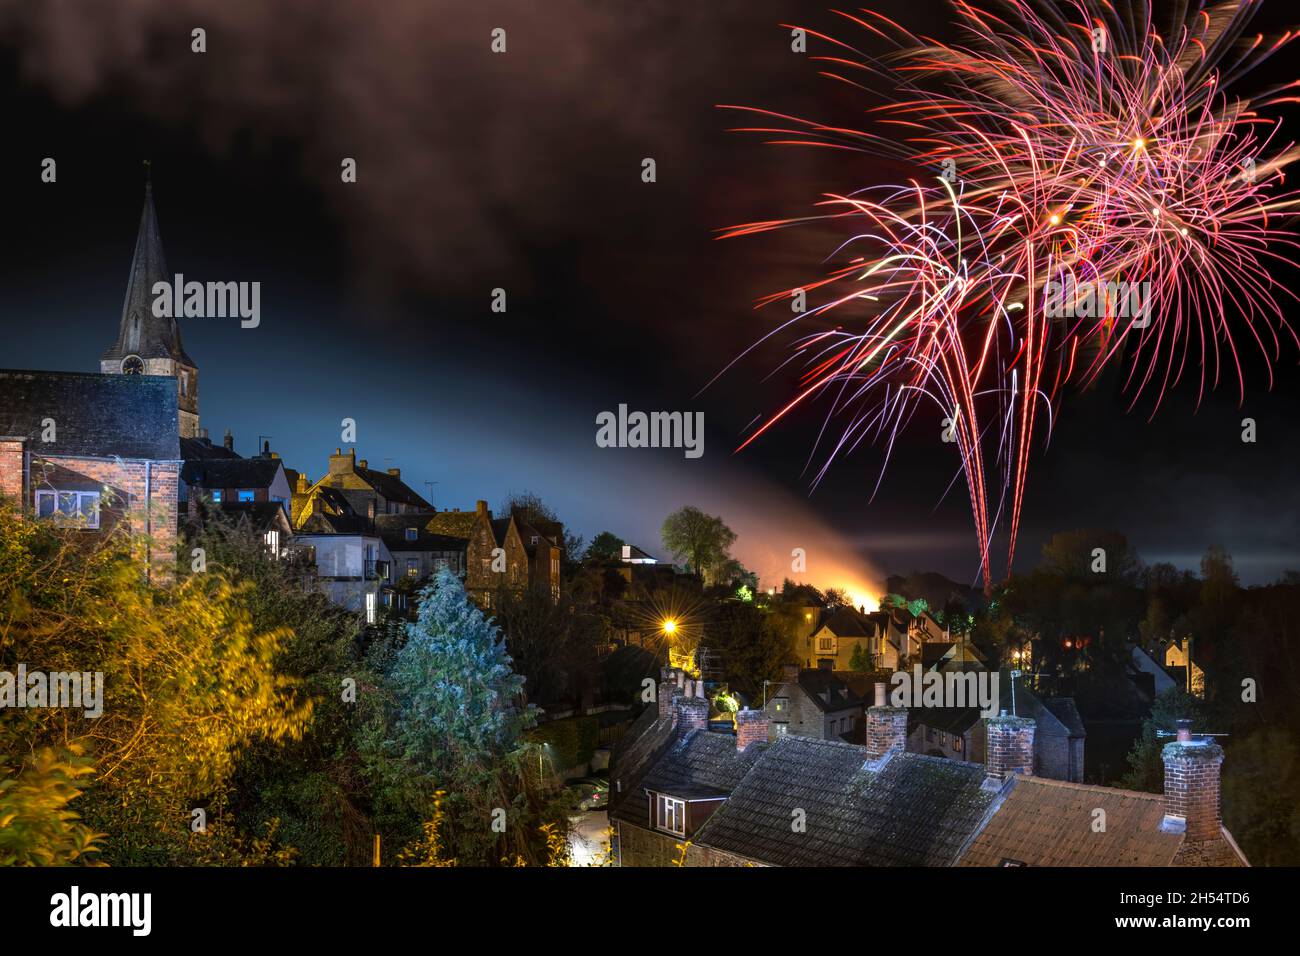 Malmesbury, Wiltshire, England. Saturday 6th November 2021 - After a day of heavy cloud and drizzle the annual firework display gets underway in the Wiltshire hillside town of Malmesbury. Credit: Terry Mathews/Alamy Live News Stock Photo